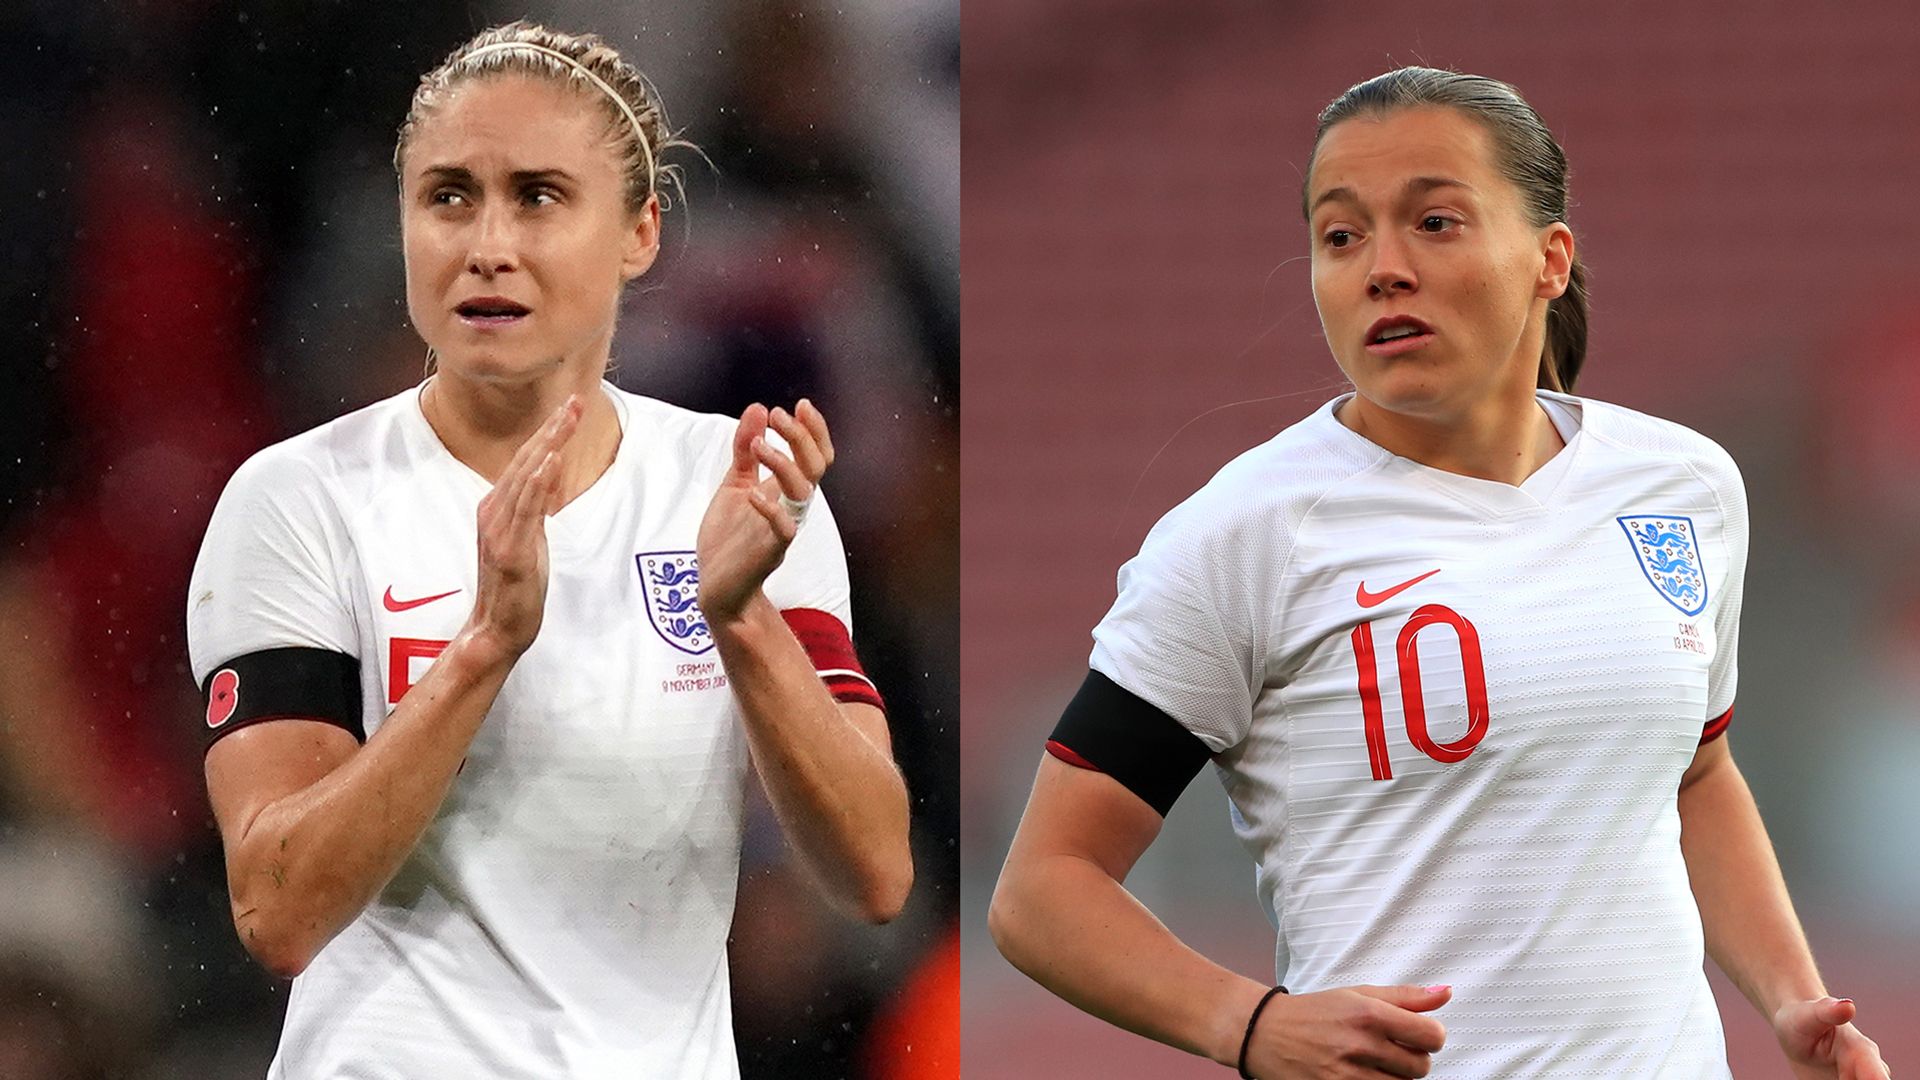 Houghton out, Kirby in England's 23-player squad for Women's Euros